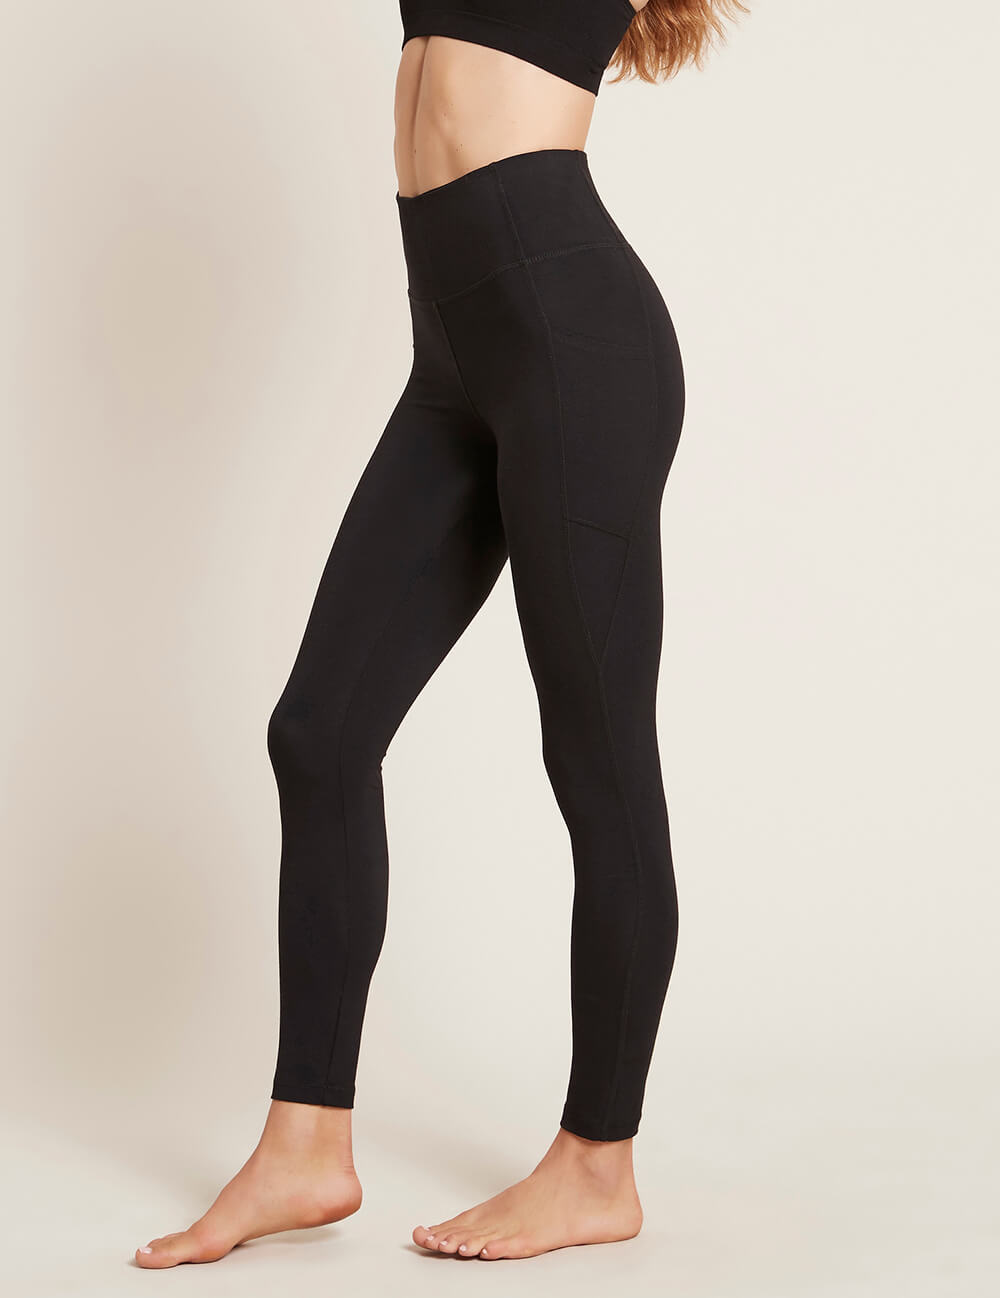 Boody Bamboo Organic Cotton Active Blended High-Waisted Full Leggings with Pocket in Black Side View